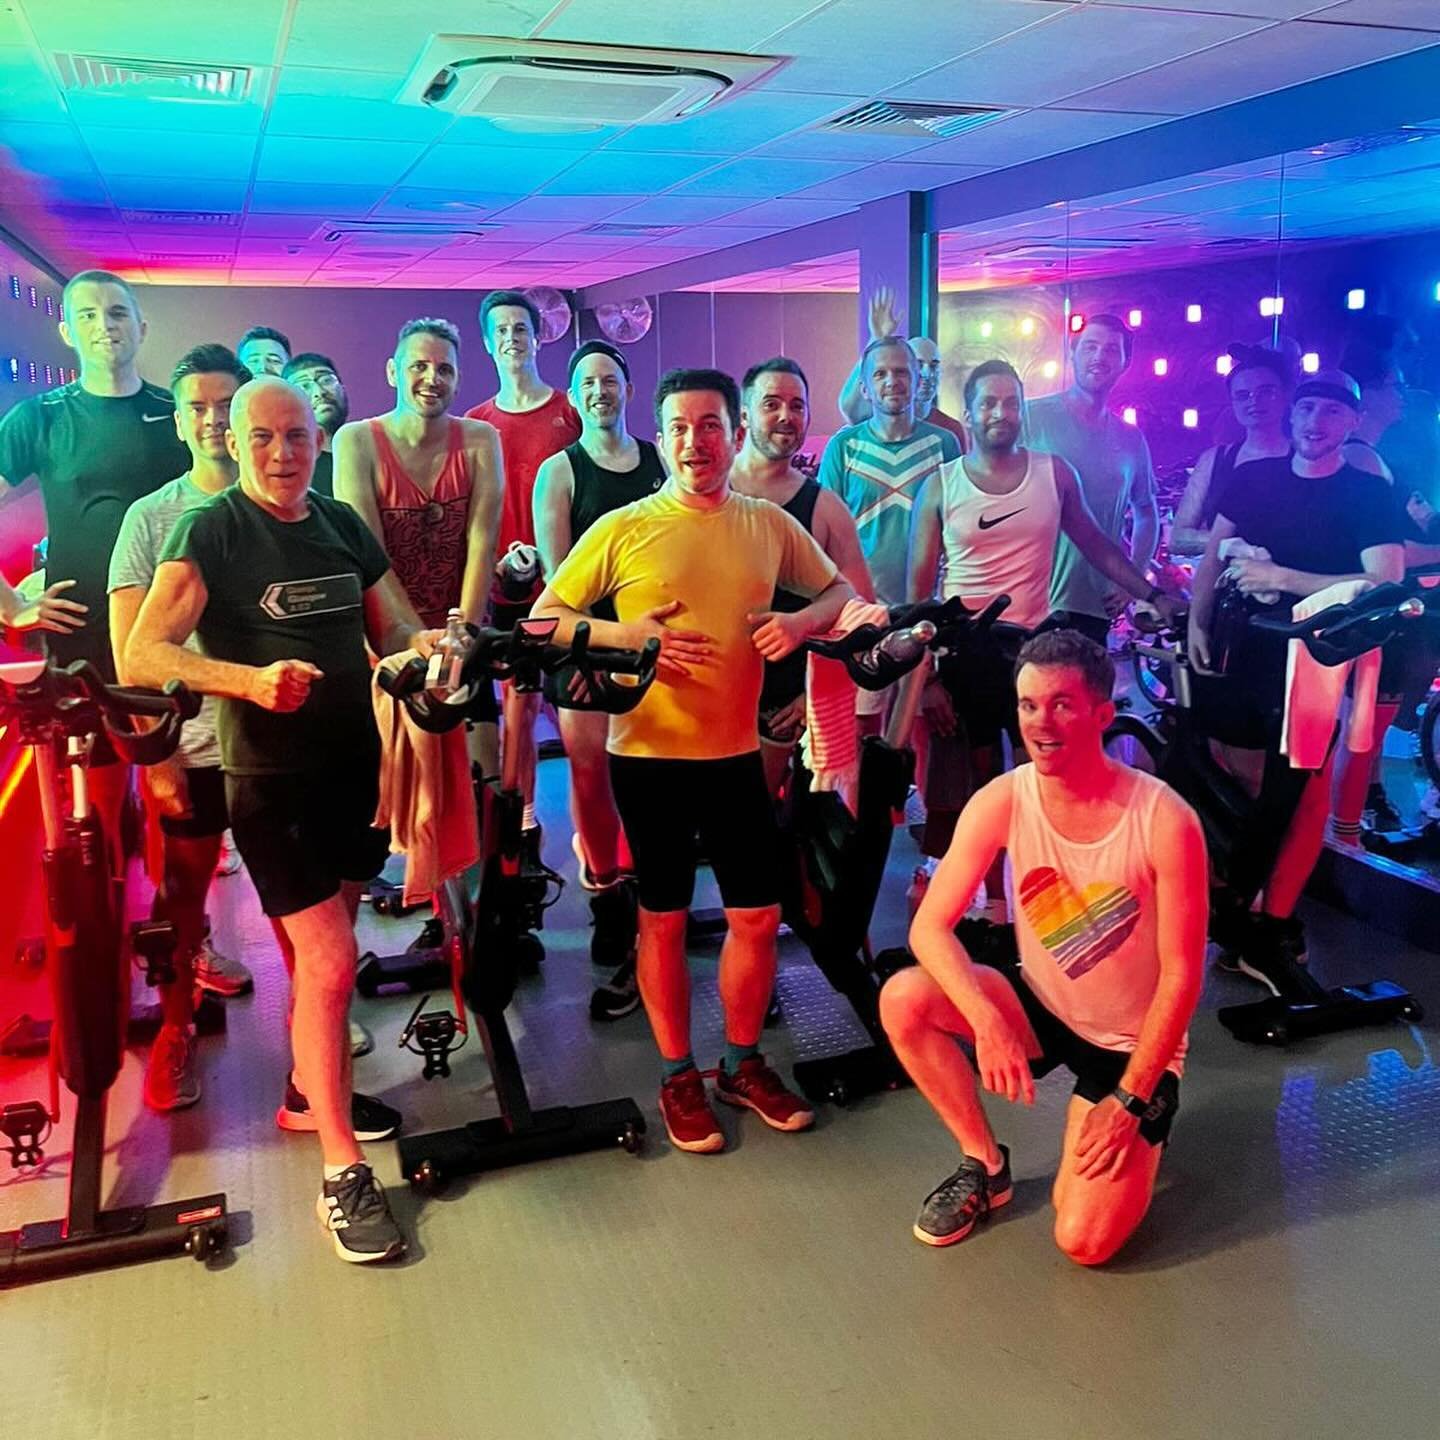 🌈🪩🌮 That&rsquo;s how we do a Monday Spinderellas! Epic Gwen v Pink playlist with P!NK coming out as our champ&hellip; great work everyone, see you on a bike soon! #spinder #spinstudio #lgbtfitness #gayuk #gaylondon #gymworkout